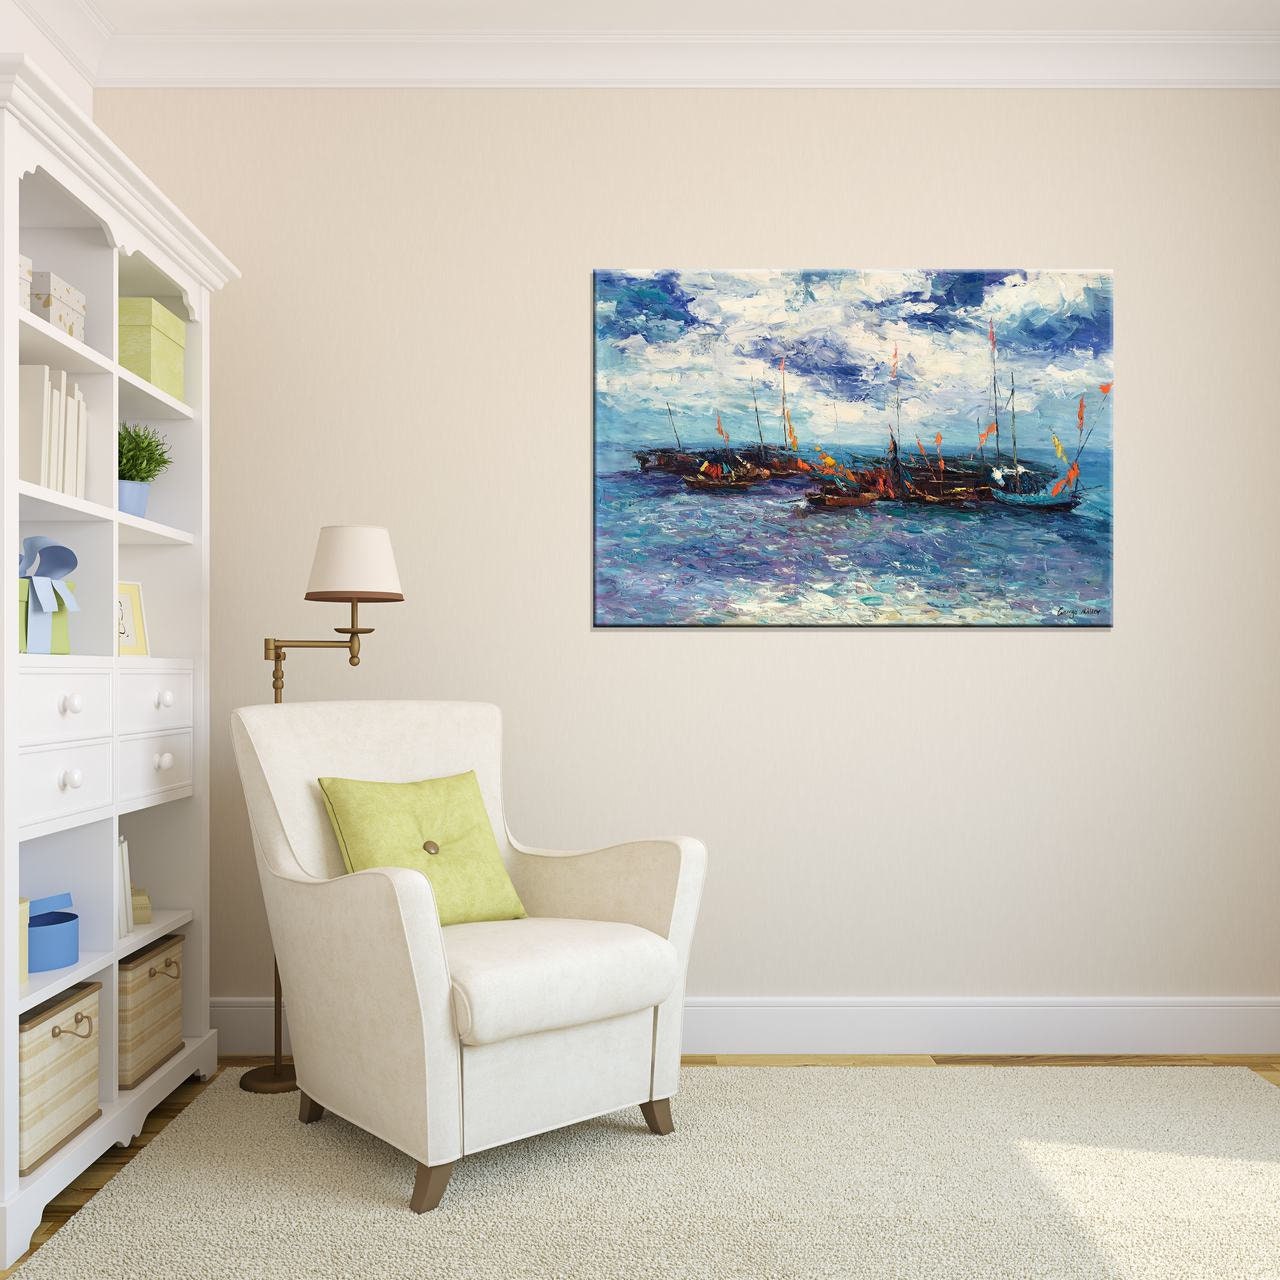 Palette Knife Fishing Boats Seascape | Handmade Oil Painting | Contemporary Canvas Art | 32x48 Inches | Ready to Ship